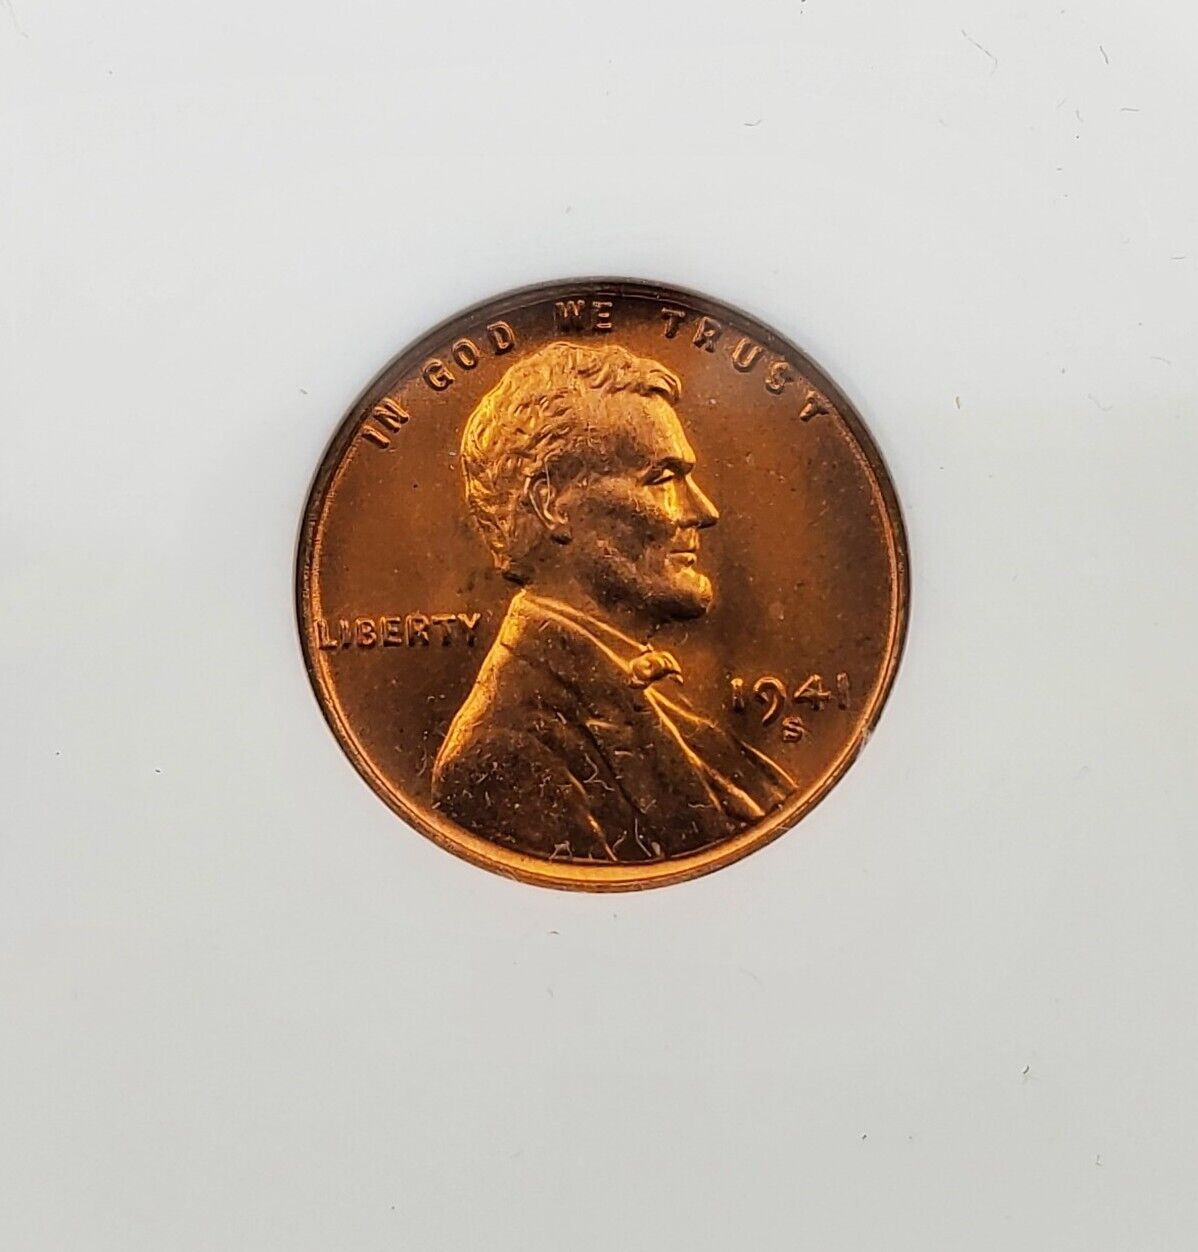 1941 S Lincoln Wheat Cent Penny Coin NGC MS67 RD RED #2